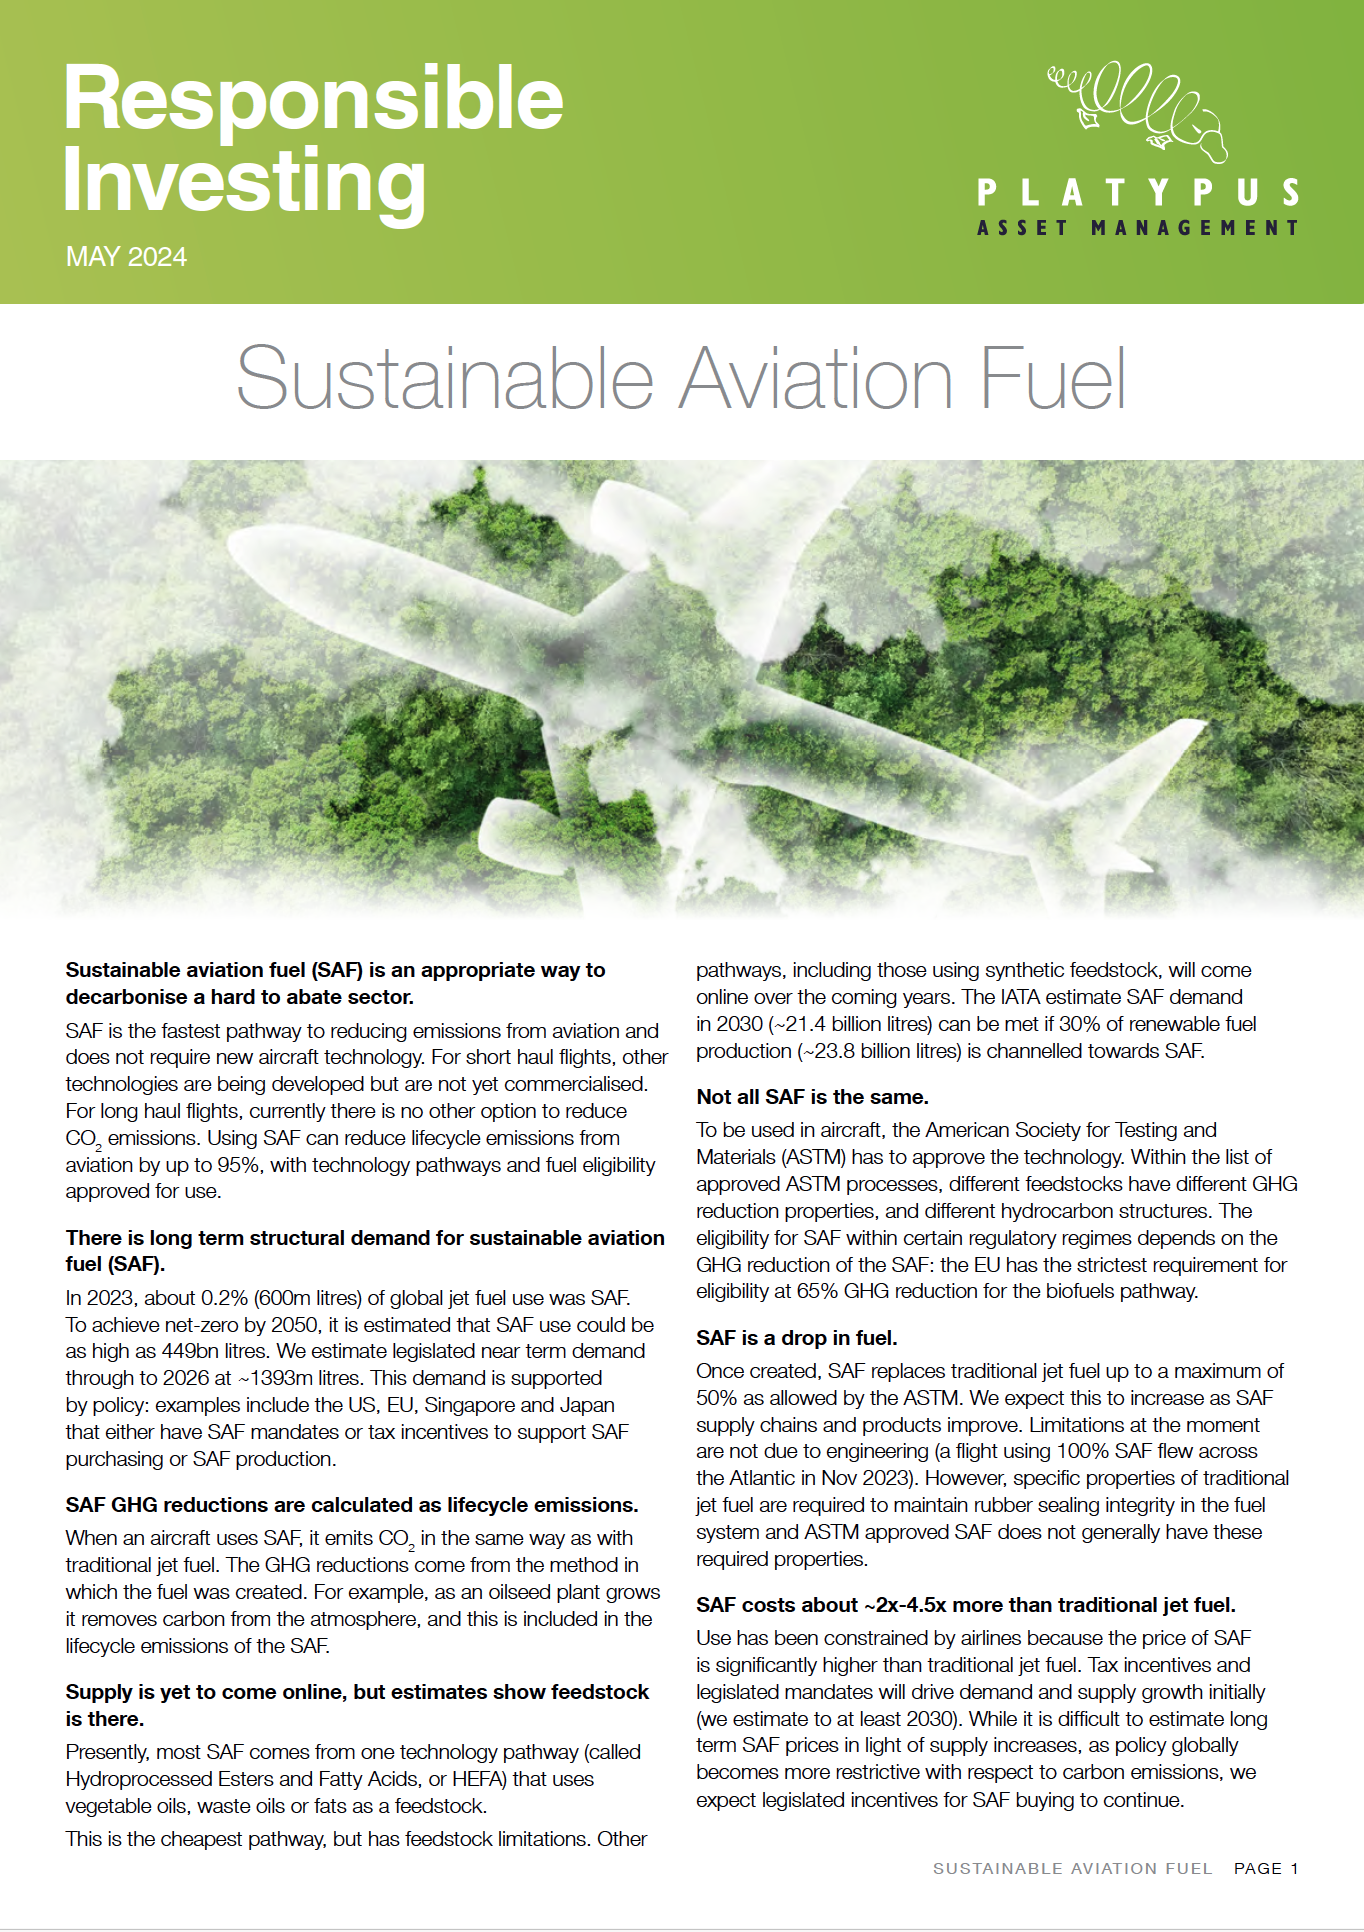 Sustainable Aviation Fuel Analysis: an in-depth article by Peter Brooke.